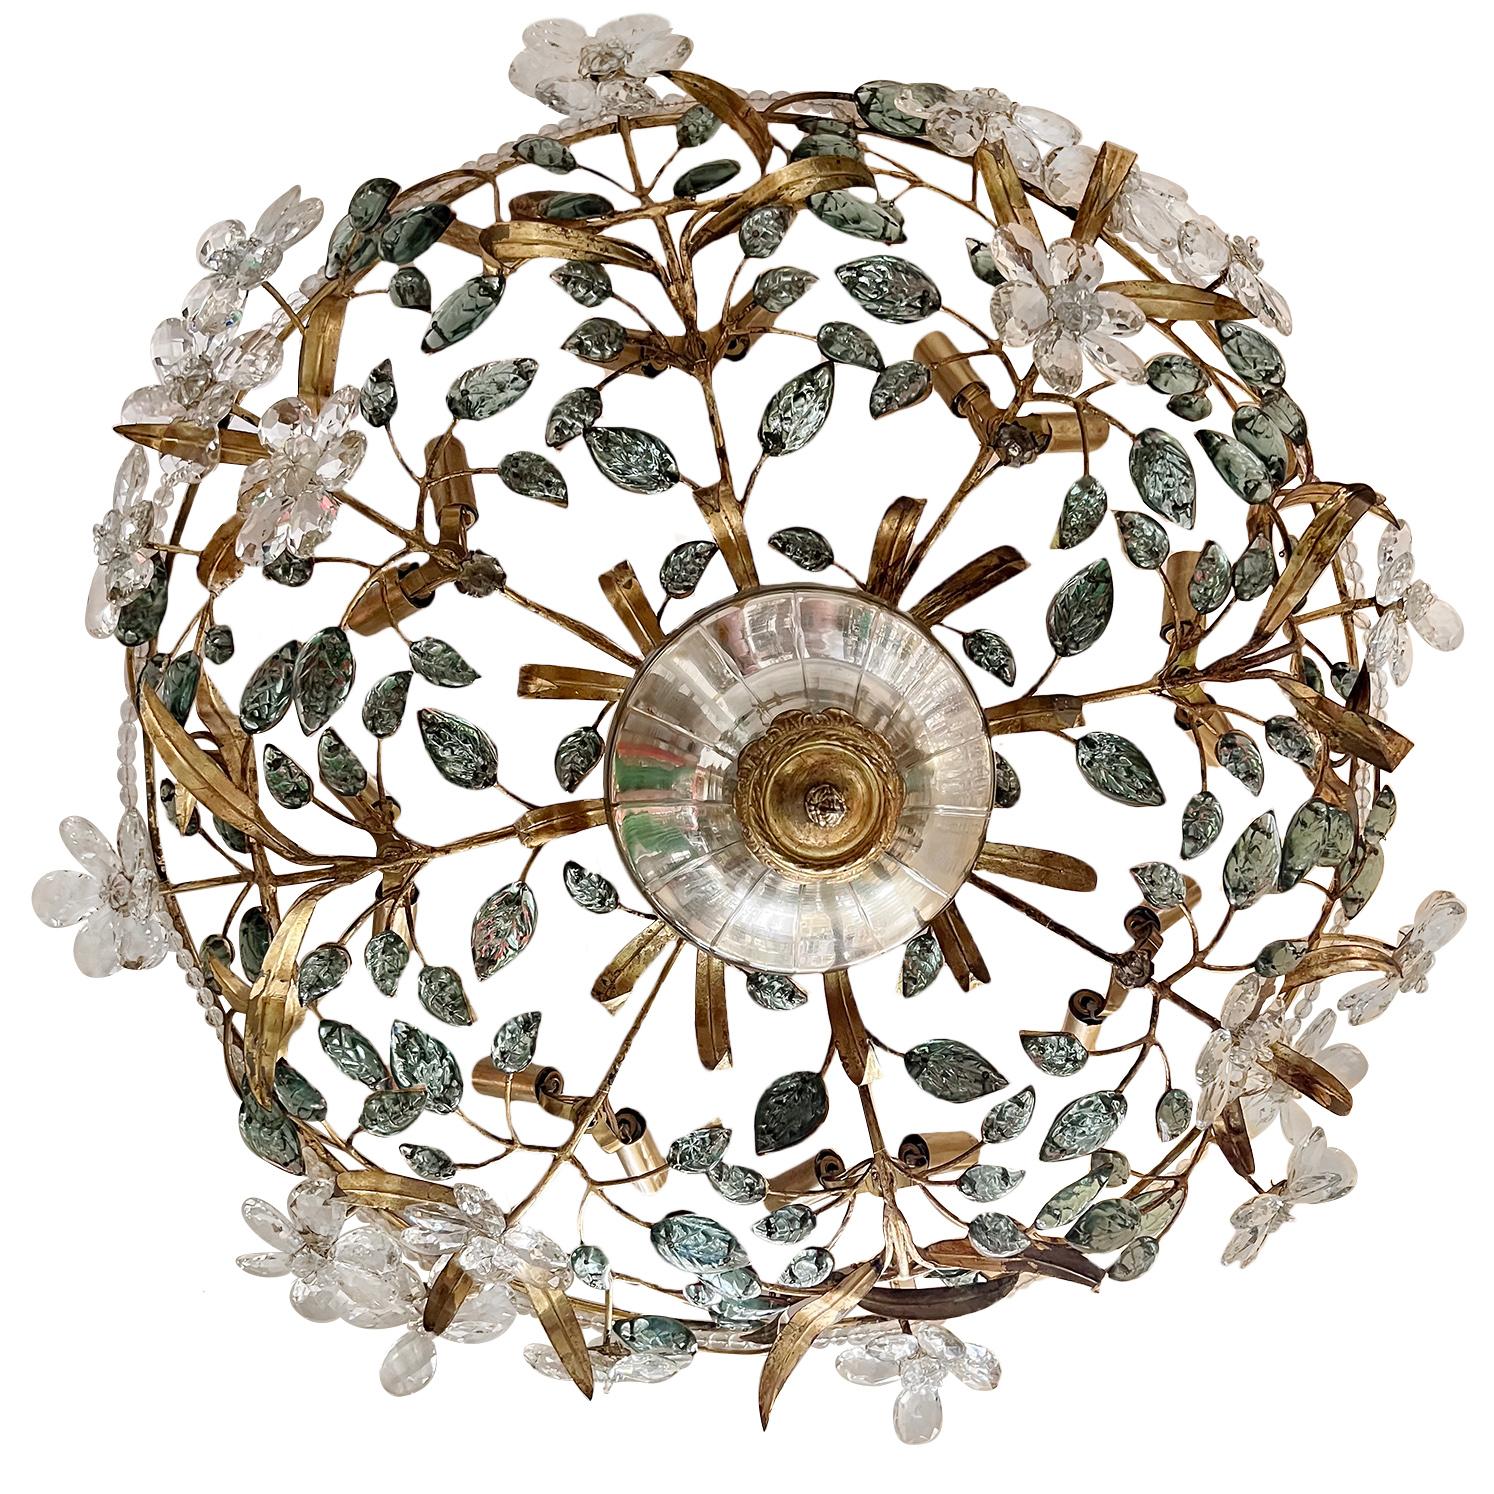 A pair of circa 1950's French mercury glass and patinated metal light fixture with molded glass leaves and flowers and with 10 interior lights. Sold individually.

Measurements:
Diameter: 31